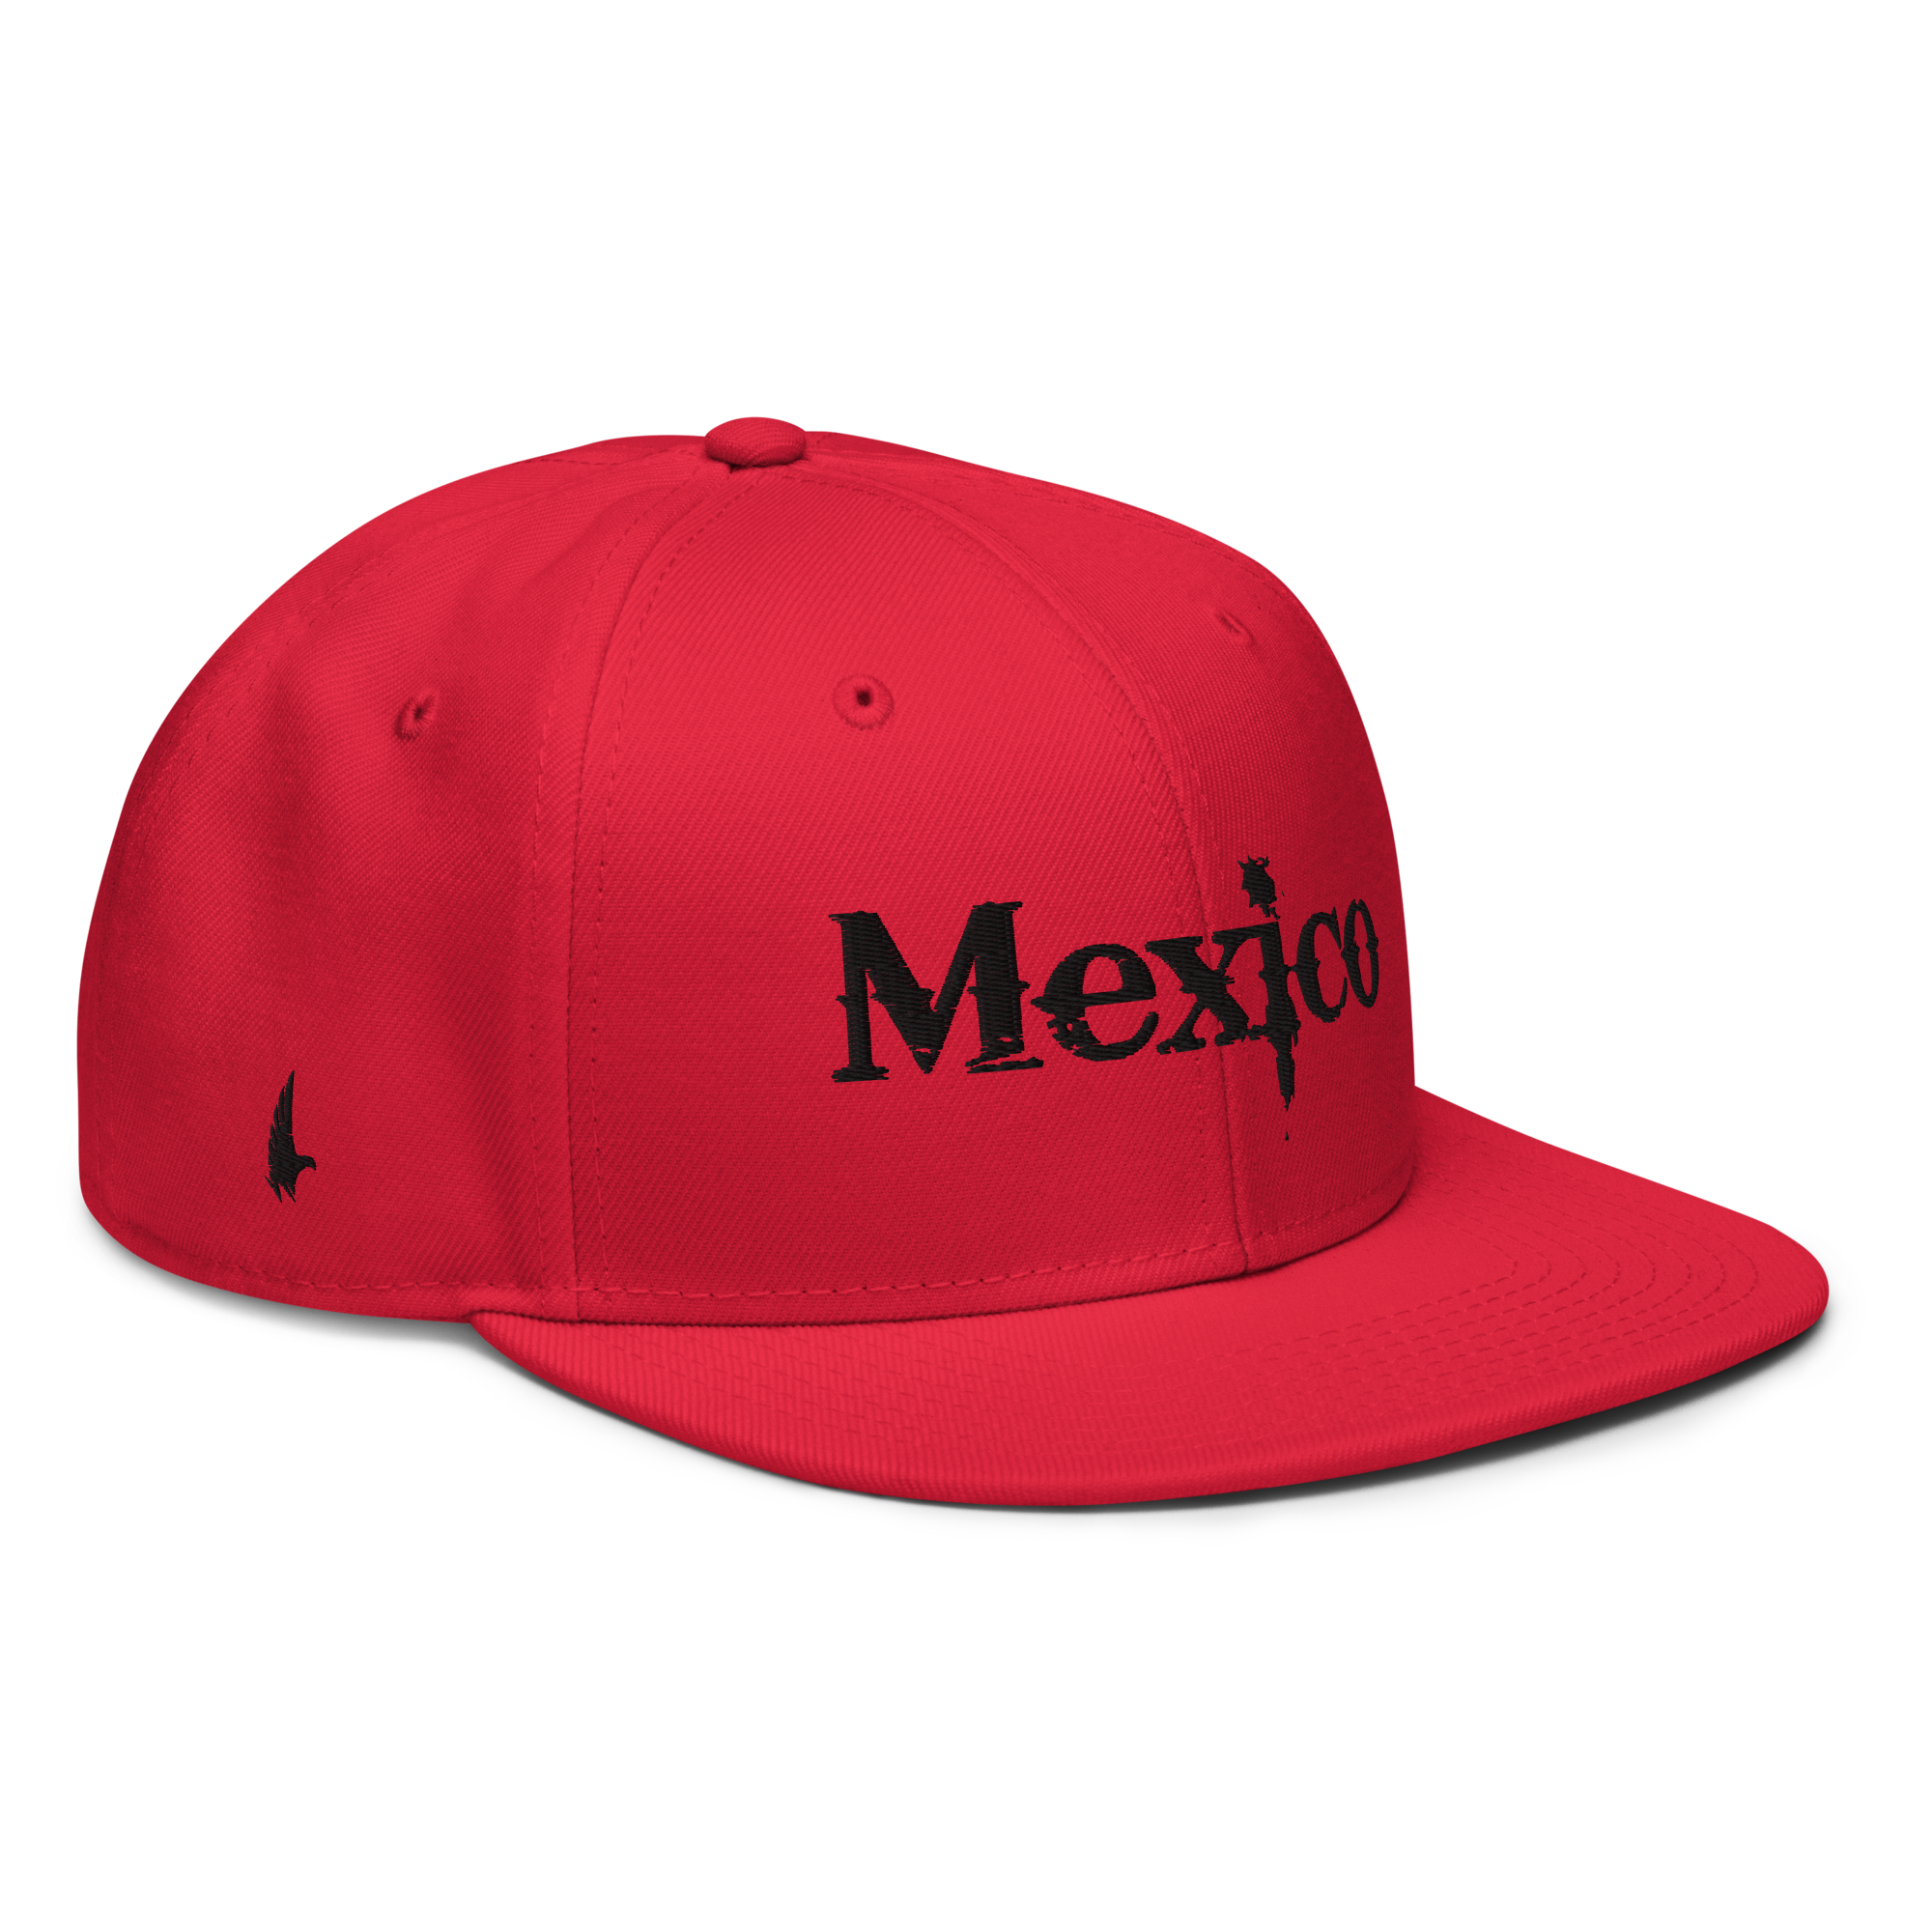 Mexico Snapback Hat Red/Black OS - Loyalty Vibes